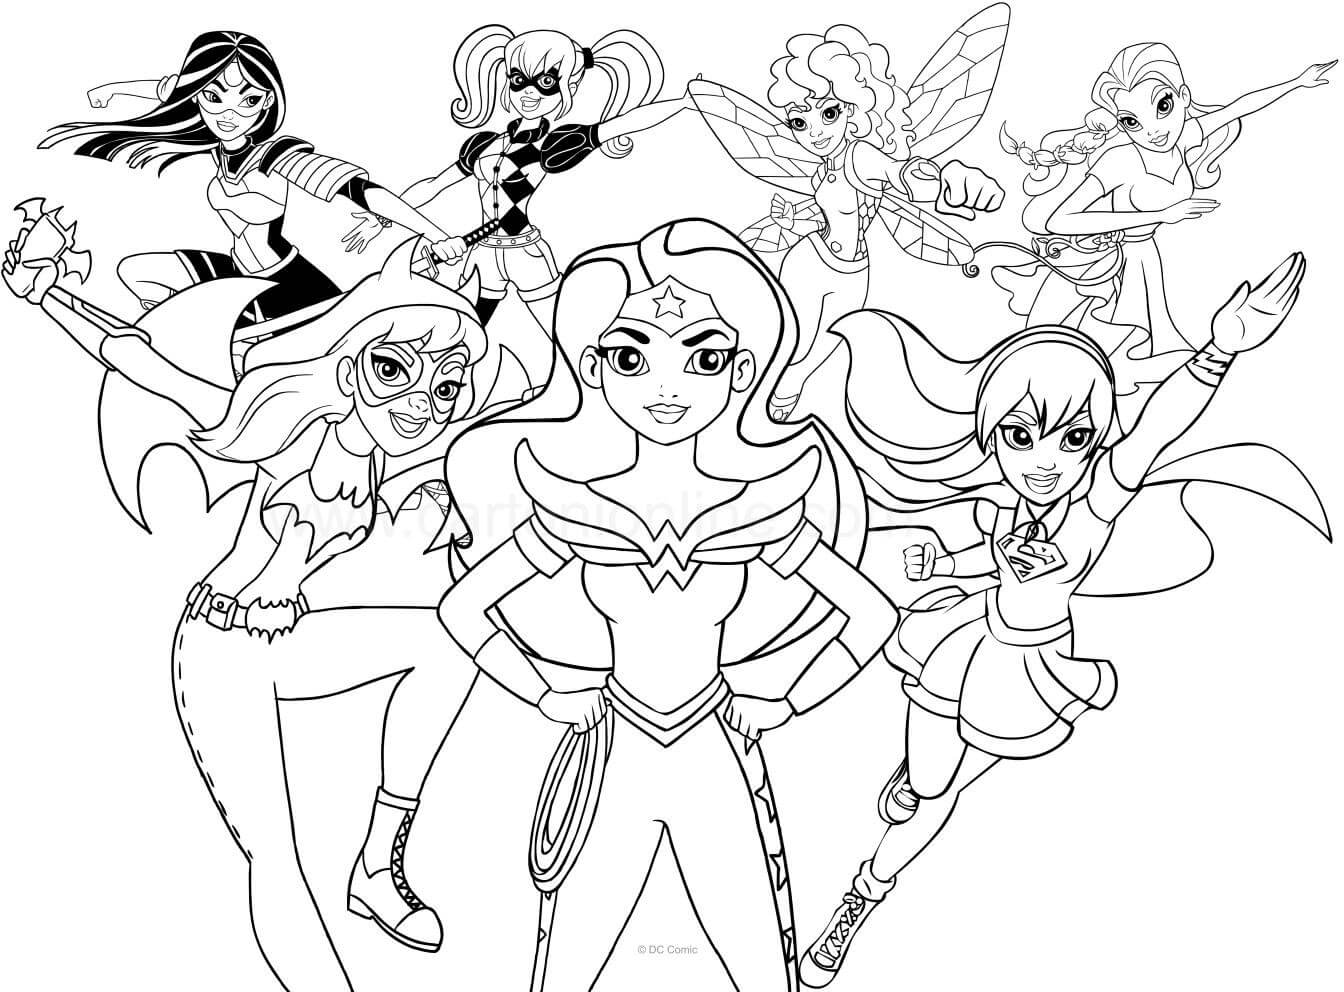 DC Super Hero Girls Coloring Pages - Free Printable Coloring Pages for Kids